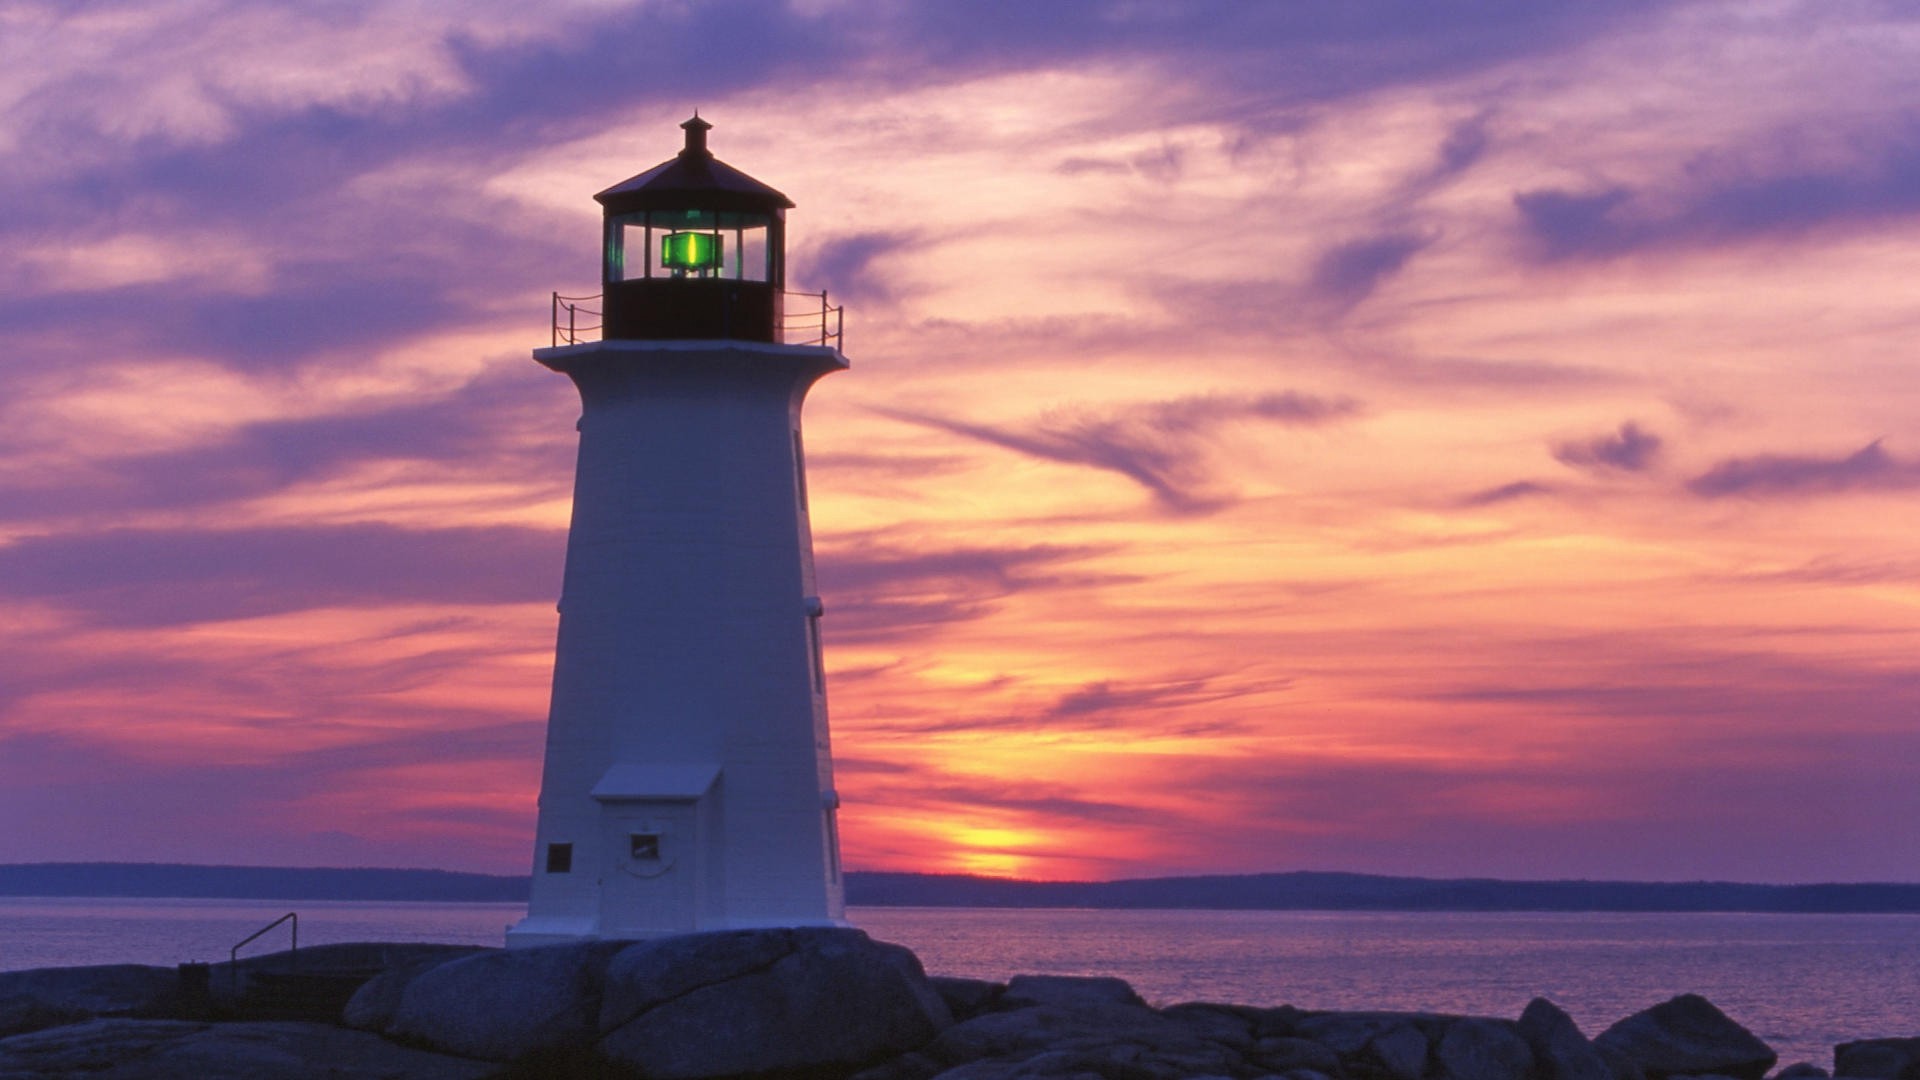 1920x1080 wallpapers: lighthouse, sunset, shore, evening (image)